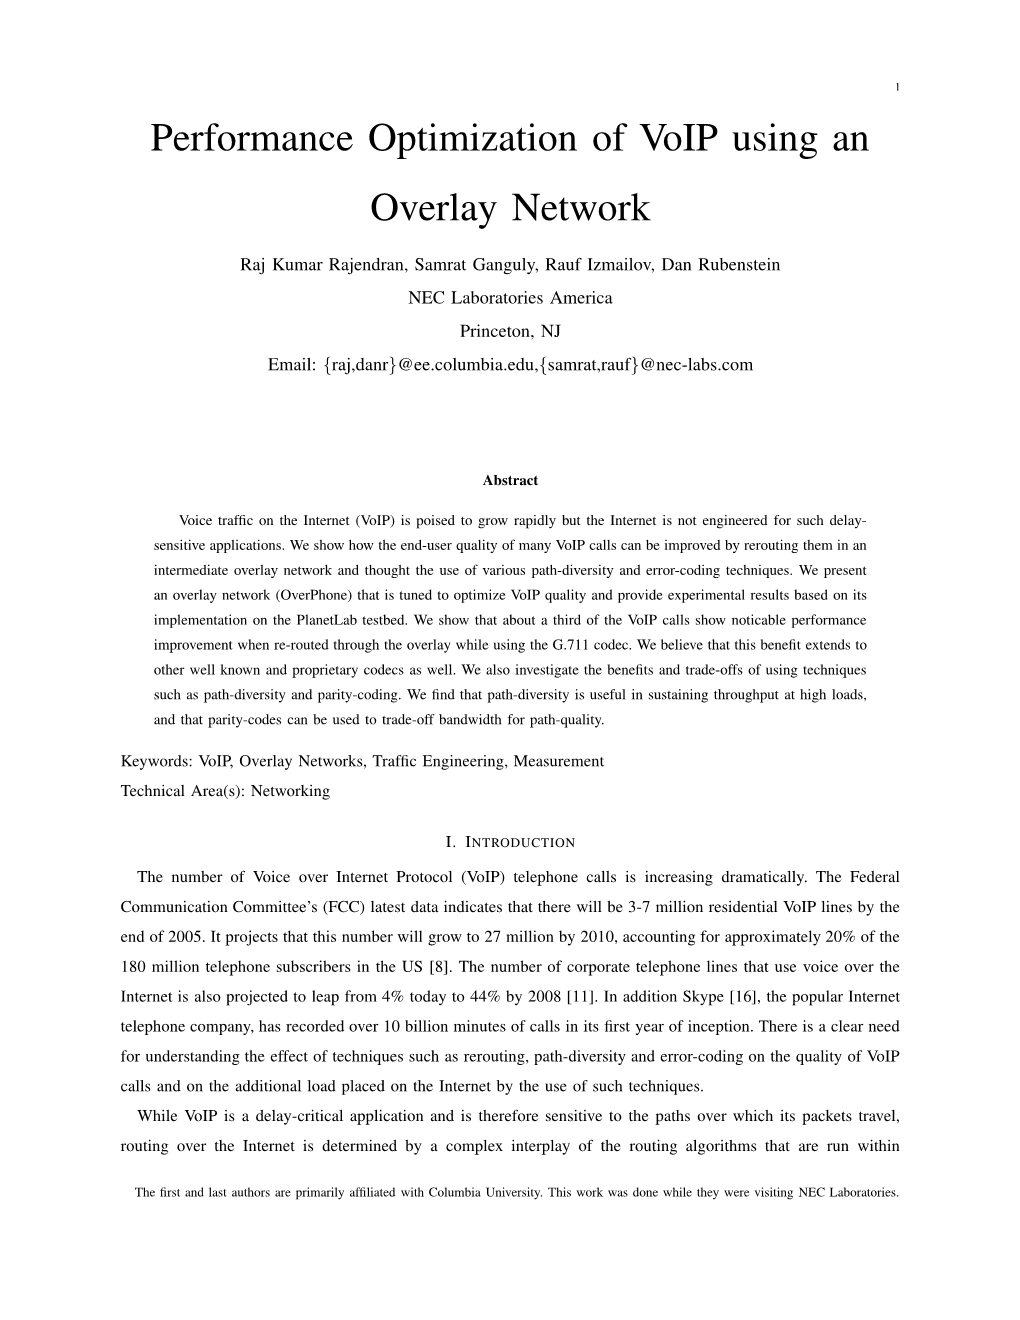 Performance Optimization of Voip Using an Overlay Network